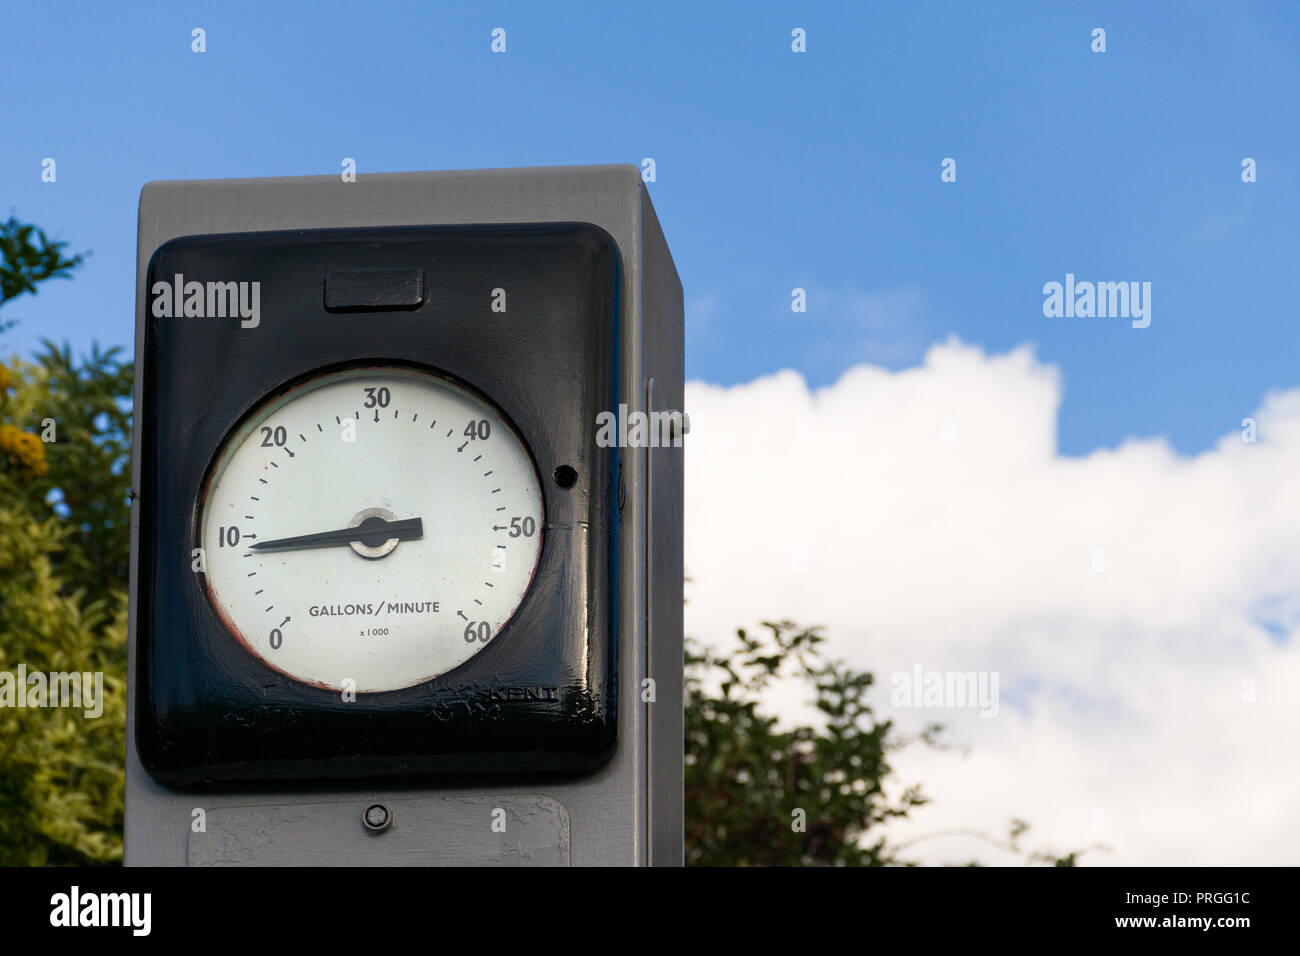 The front dial face of a large meter showing gallons per minute indicators Stock Photo